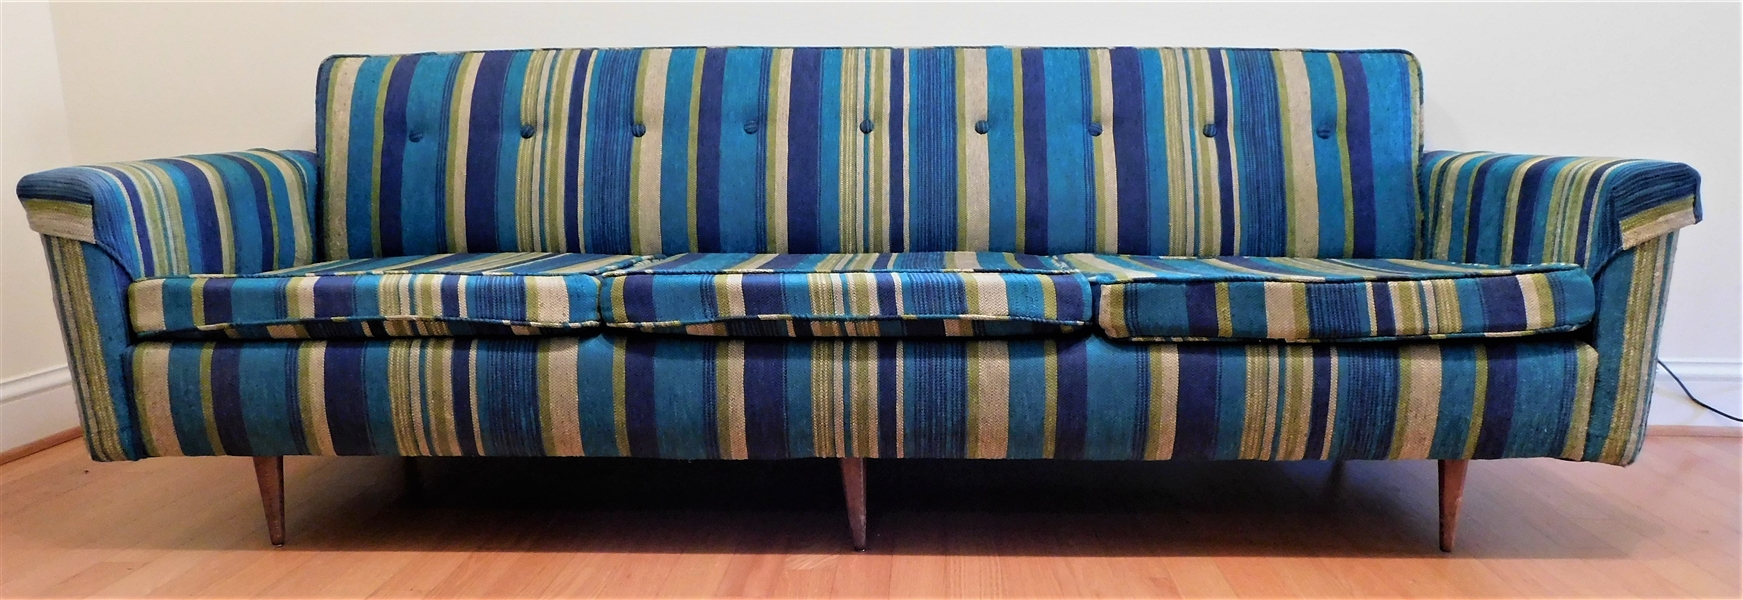 Vintage Blue and Green Sofa - Wood Legs - Button Tufted Back - 29" tall 88" by 31" -Arm Covers Attached